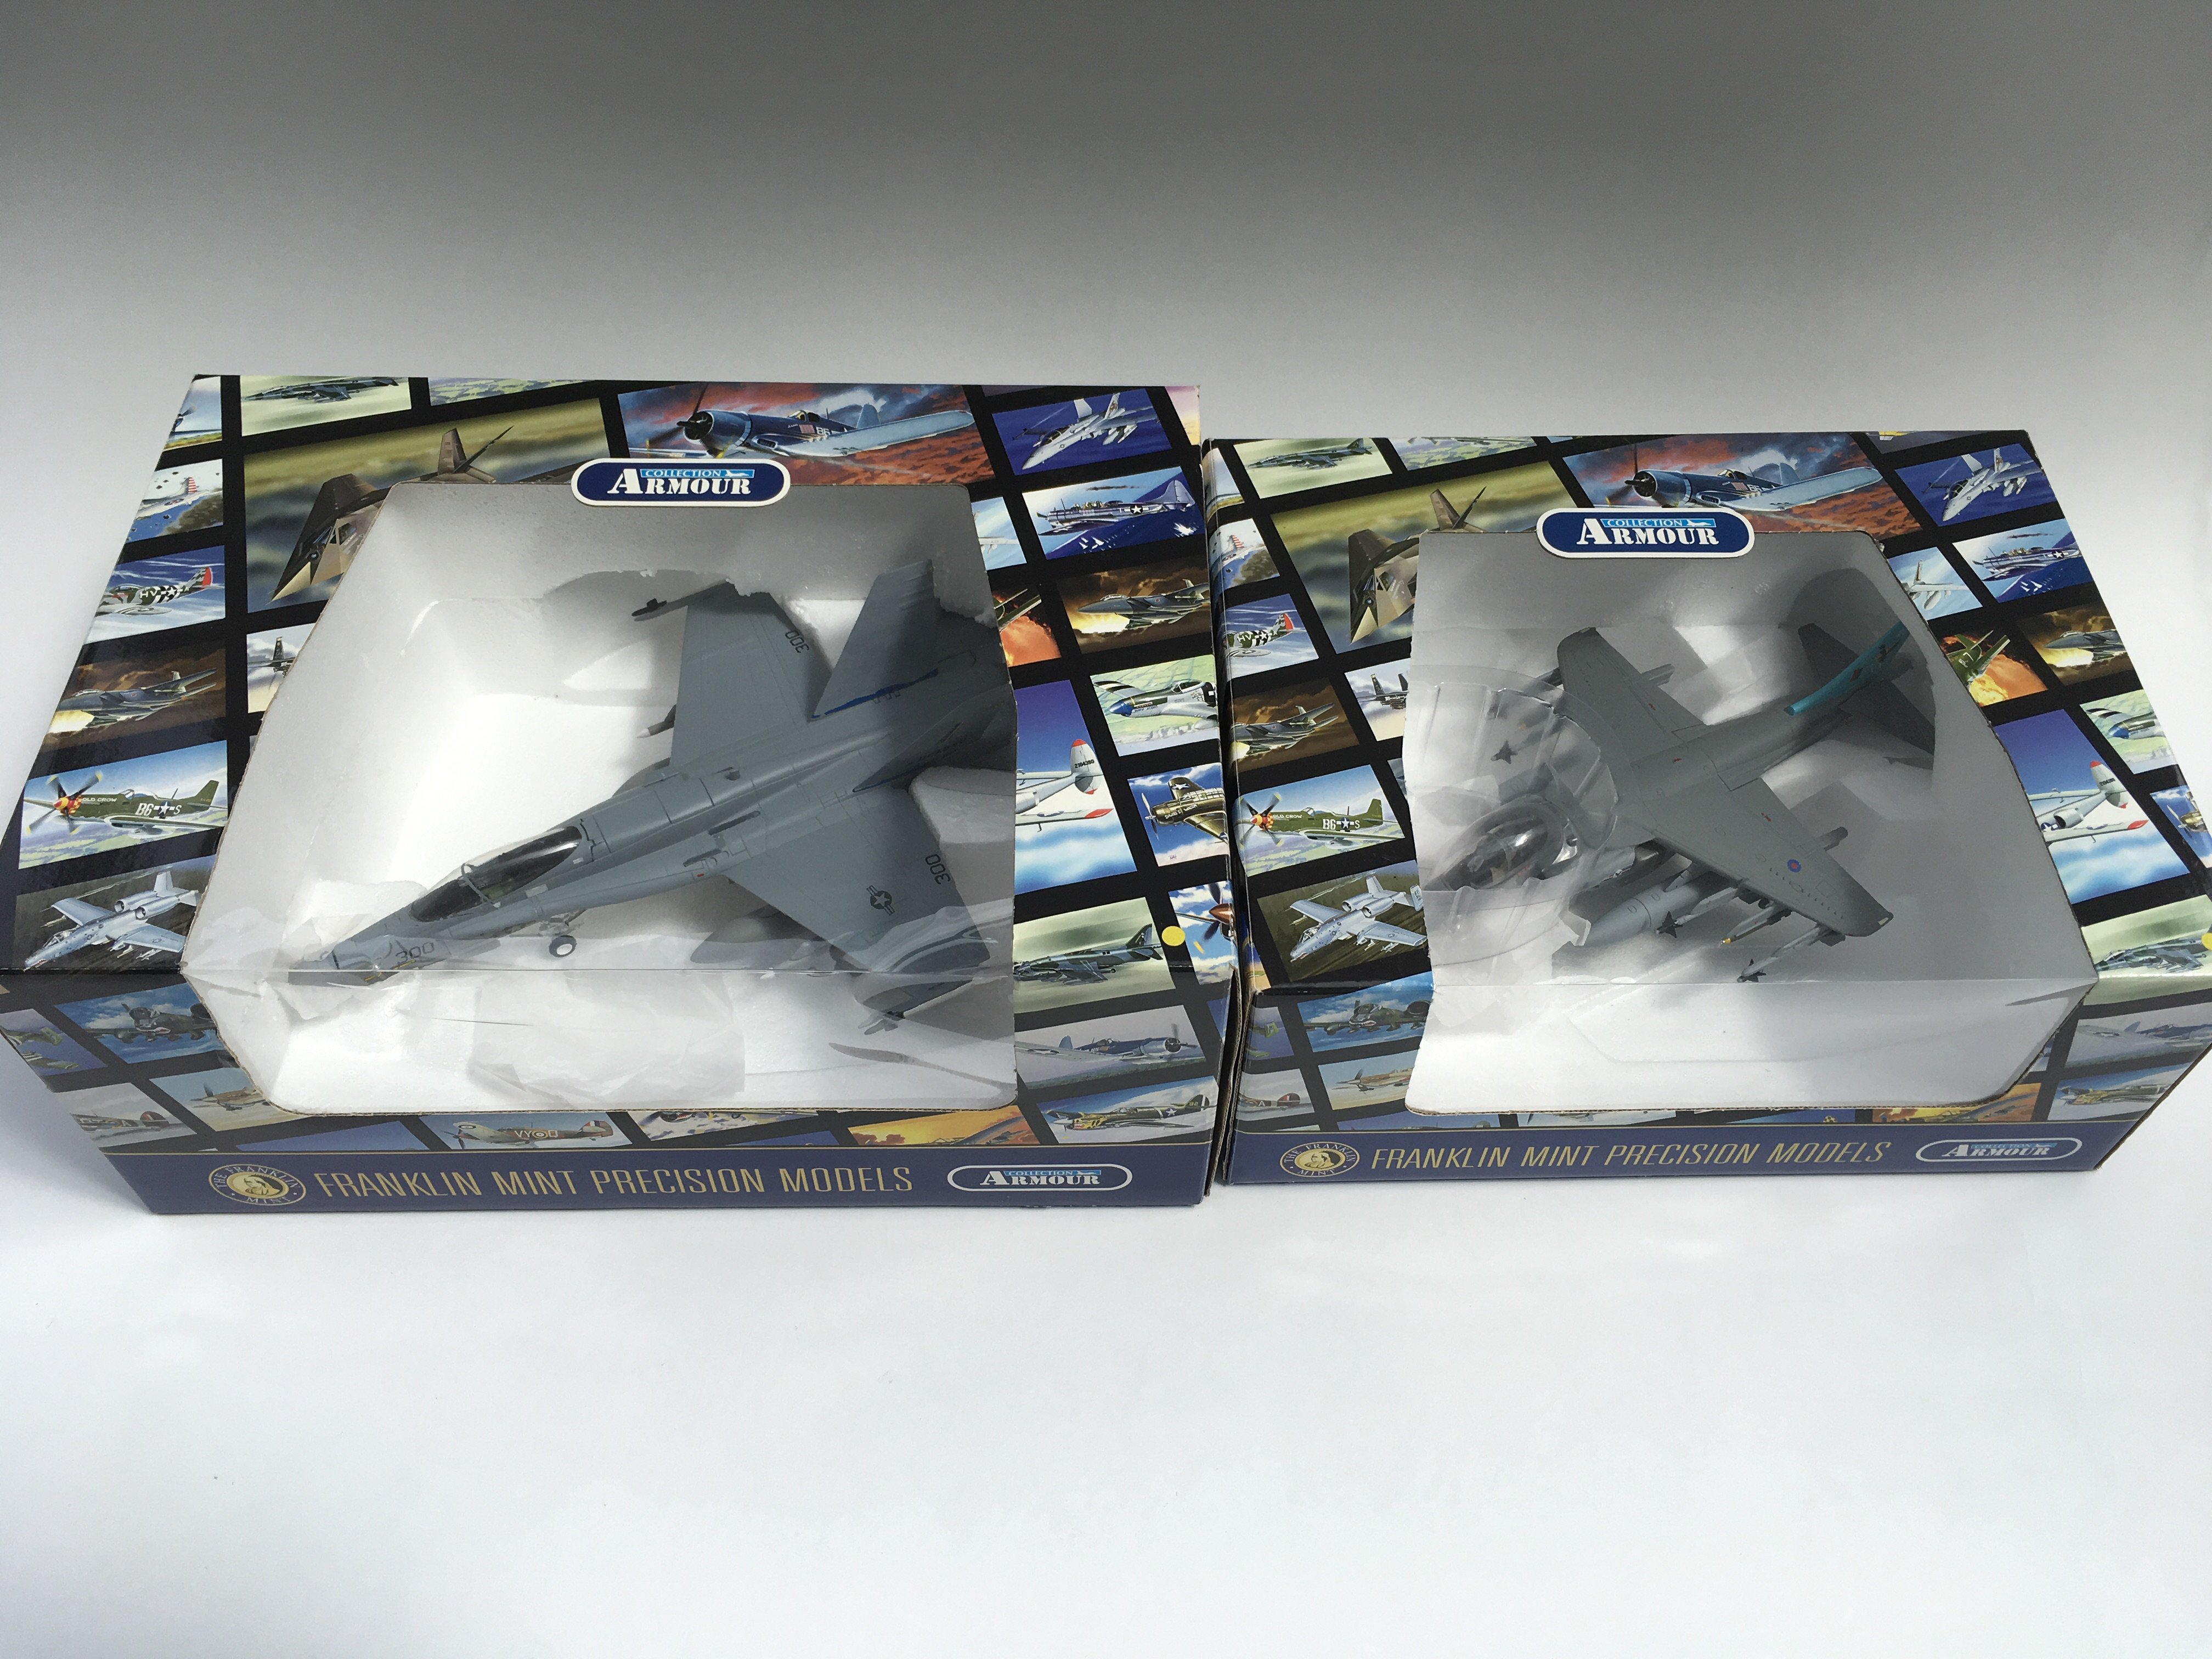 Two boxed Franklin Mint model aircraft including a